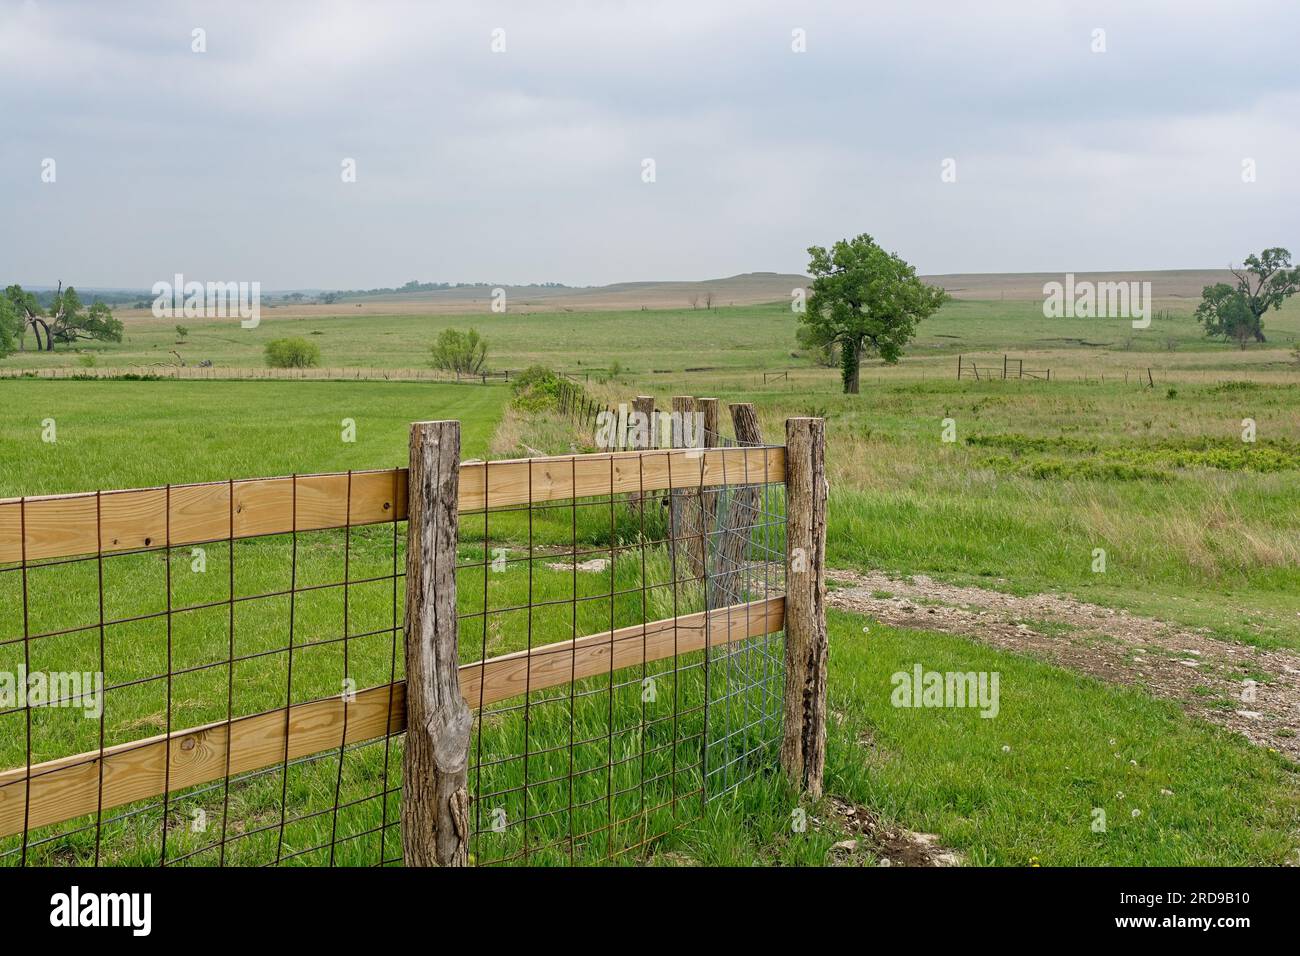 Rustic wire fence lines pasture with distant flint hill slopes of Tallgrass Prairie National Preserve Stock Photo